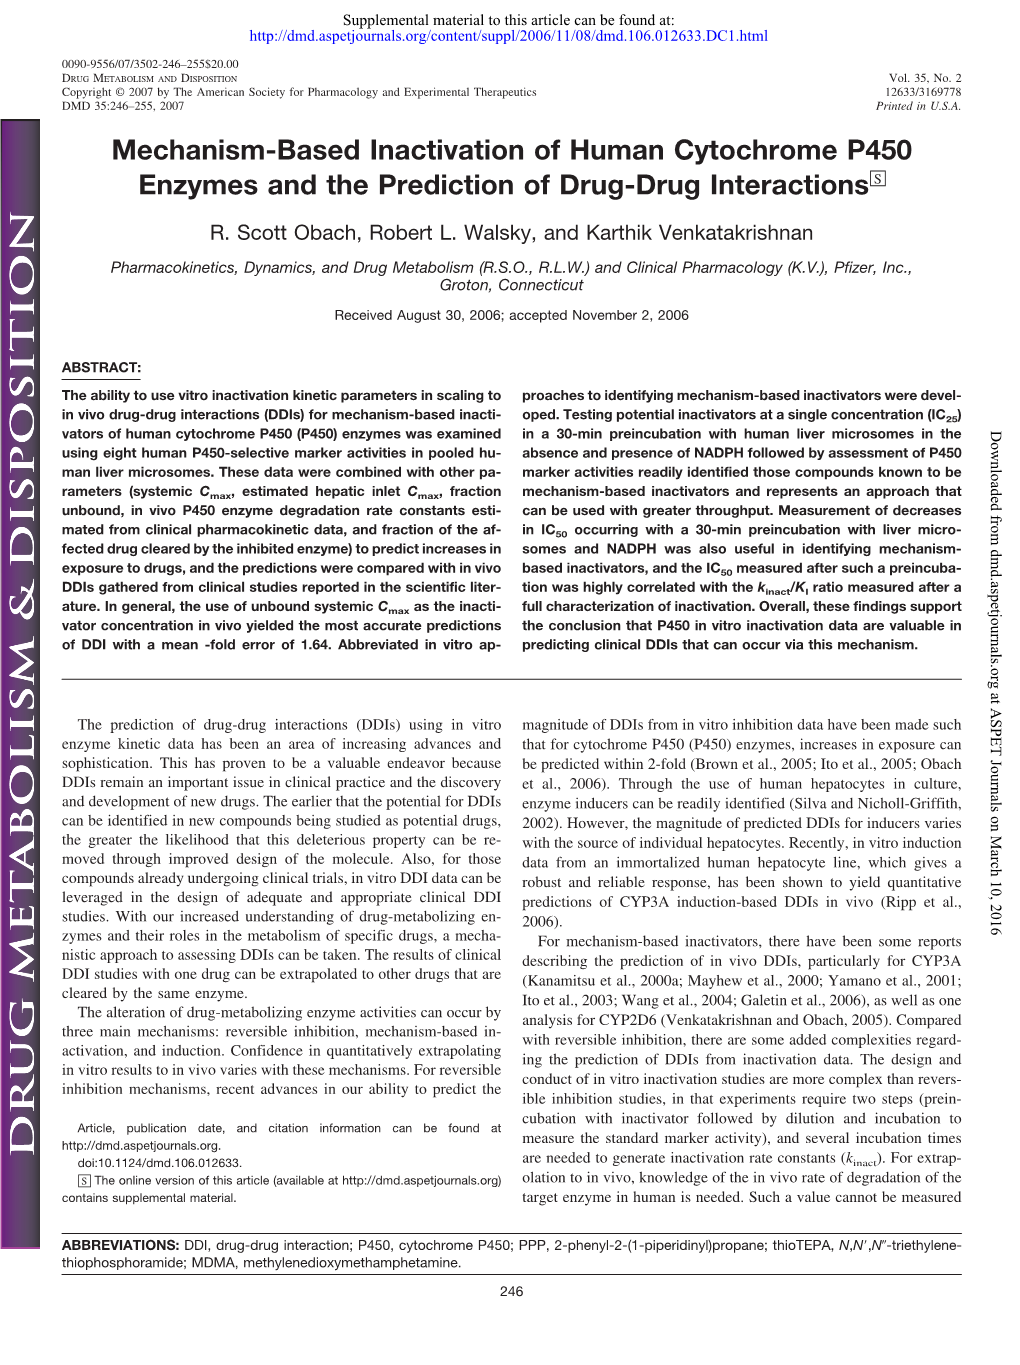 Mechanism-Based Inactivation of Human Cytochrome P450 Enzymes and the Prediction of Drug-Drug Interactions□S